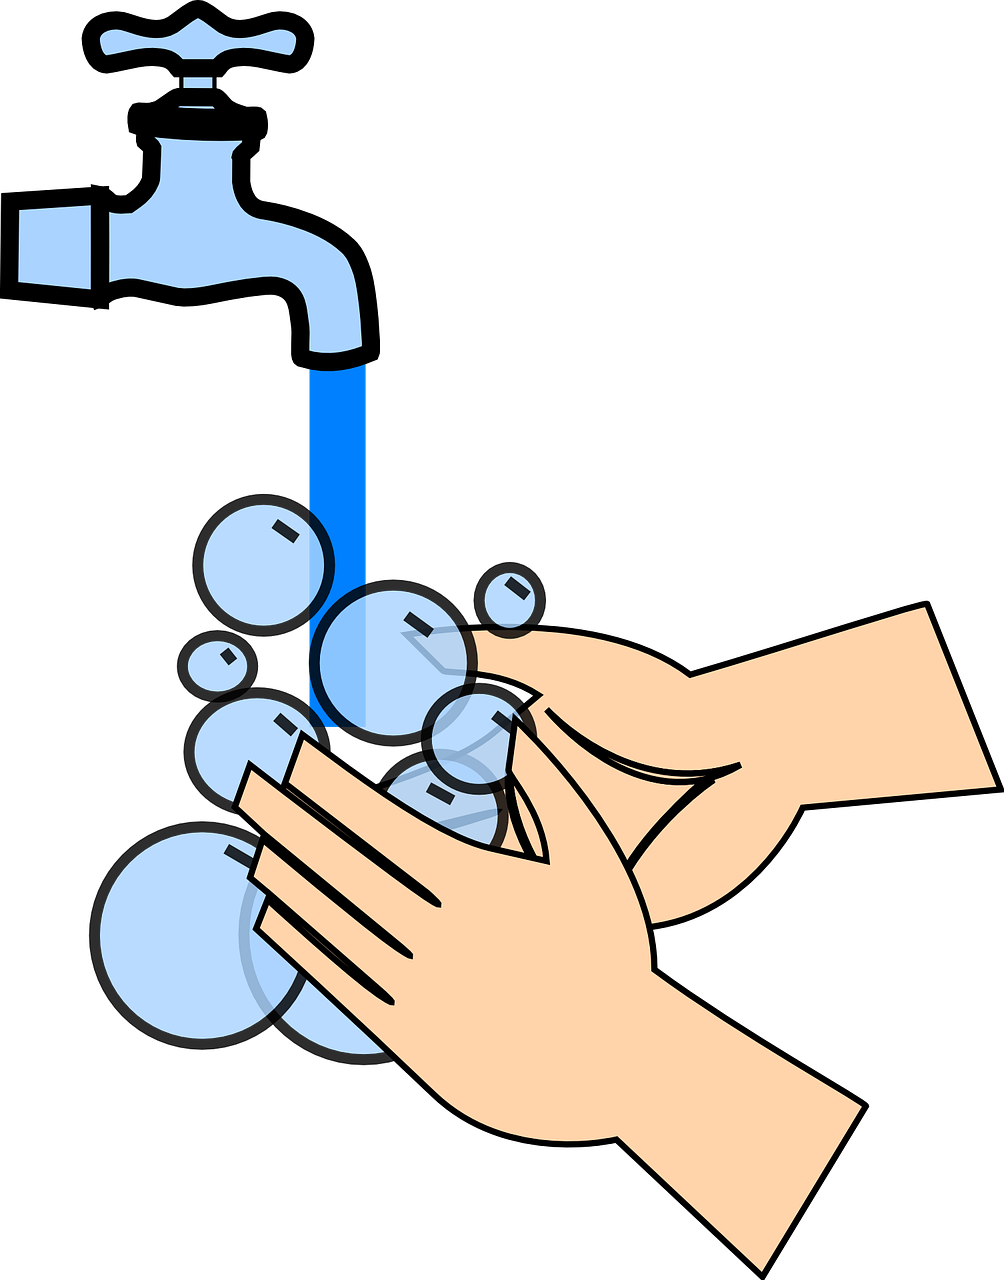 germs clipart global handwashing day